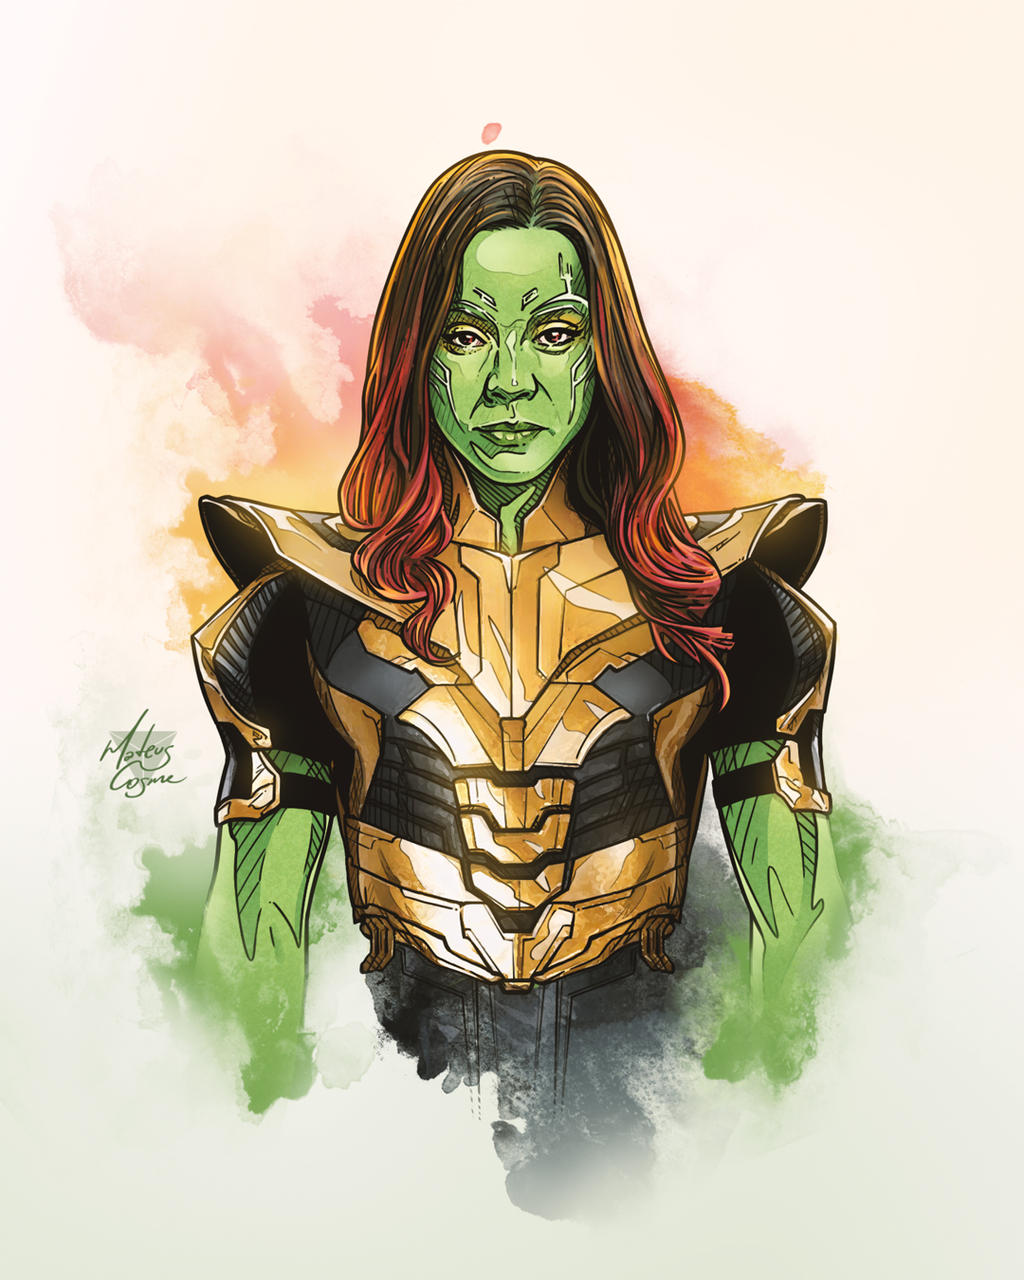 What If Gamora As Thanos Wallpapers